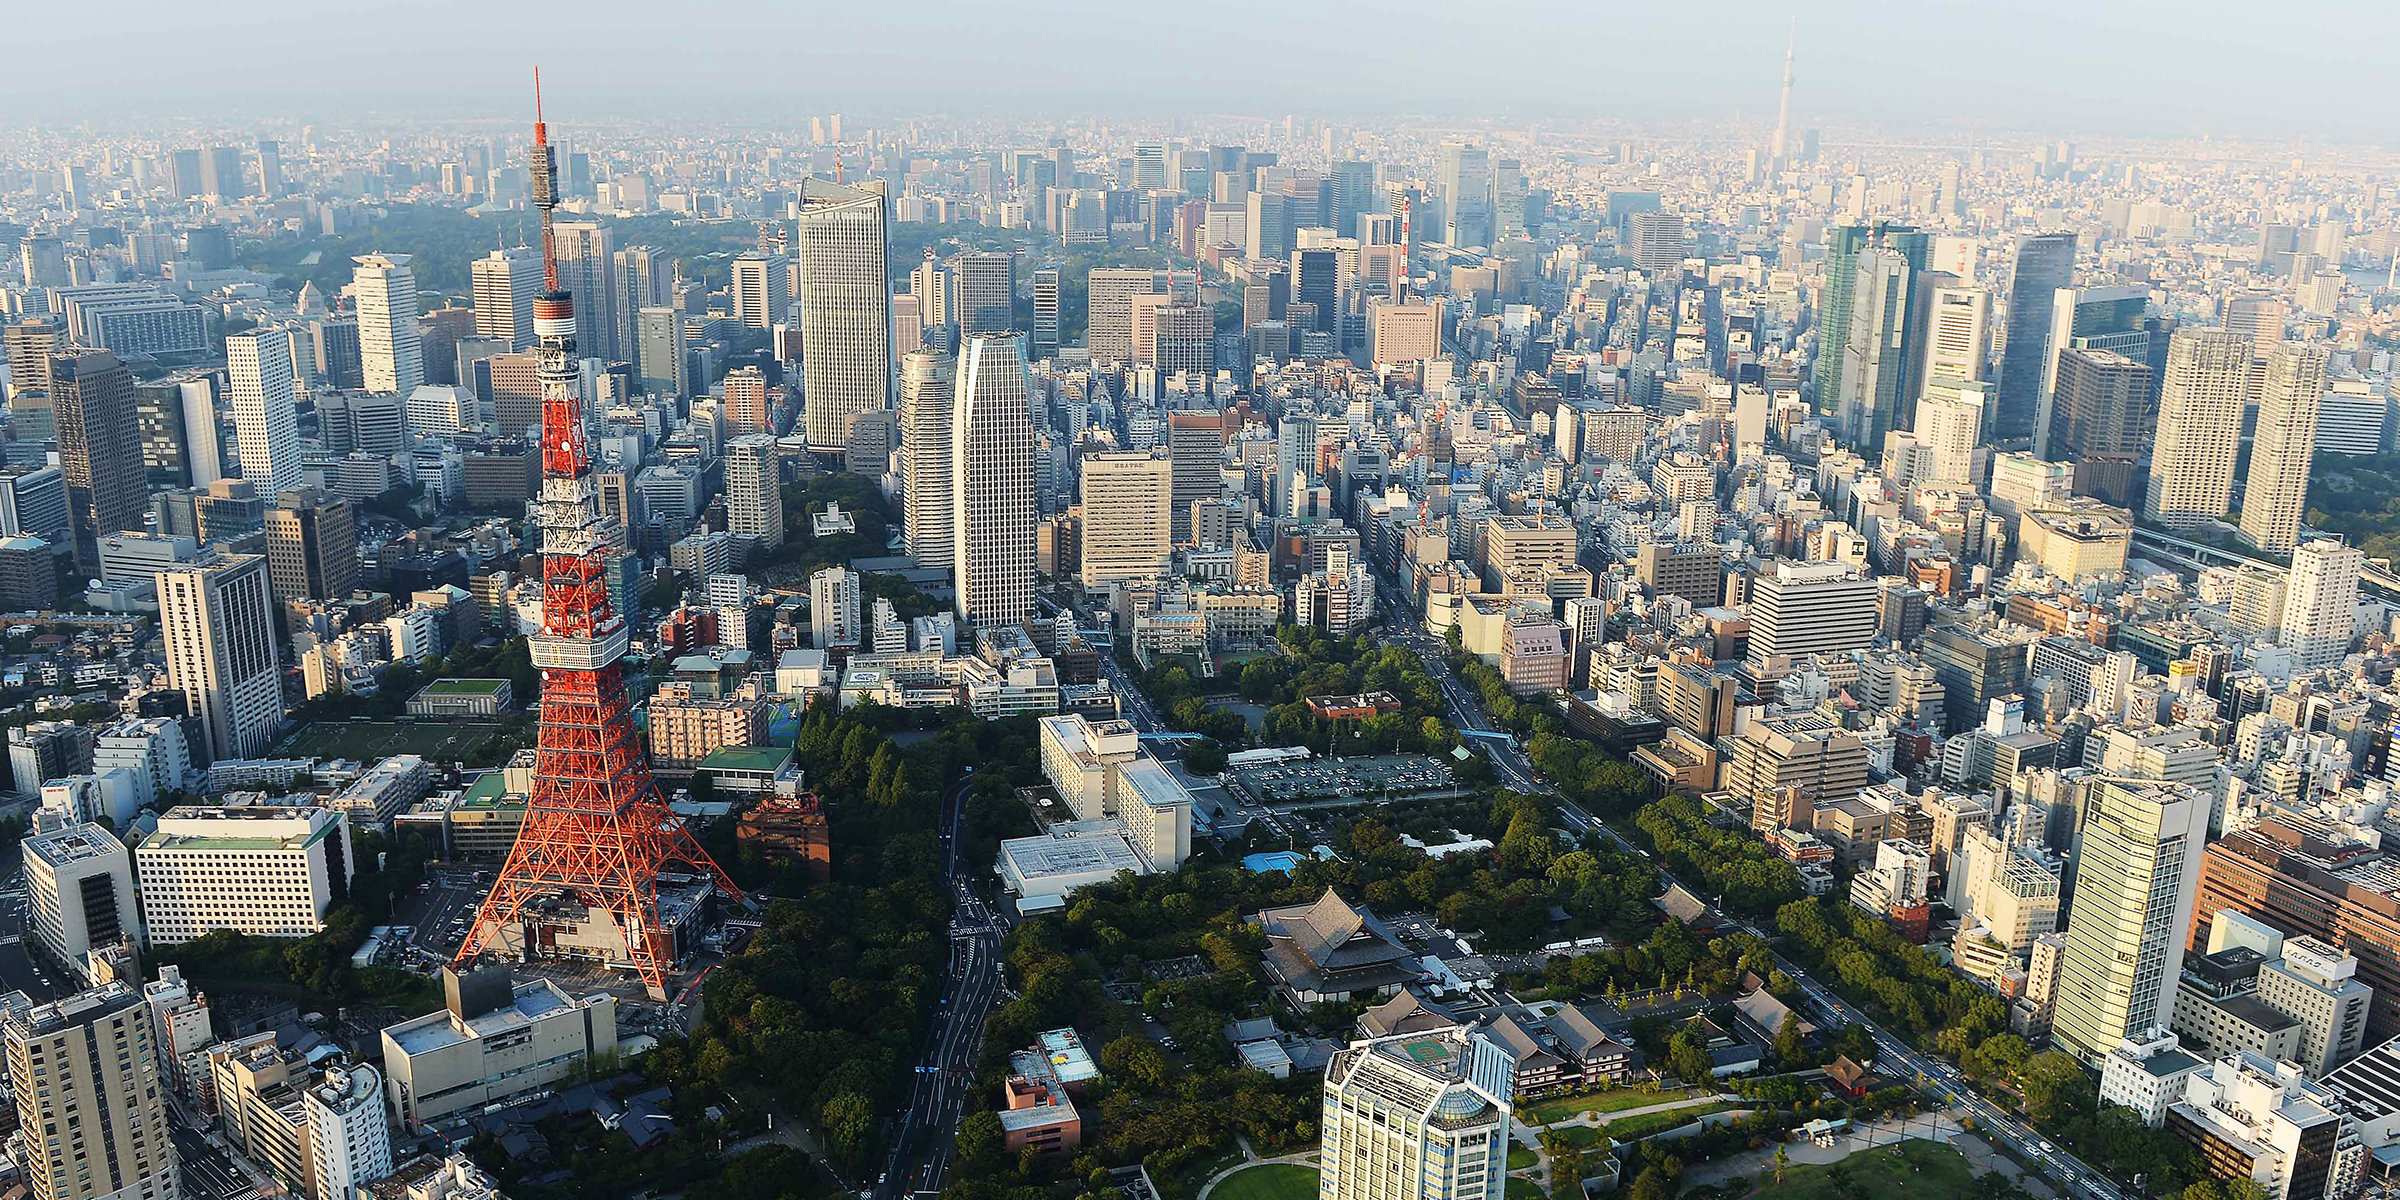 Aerial view of Tokyo, Japan | Source: Getty Images